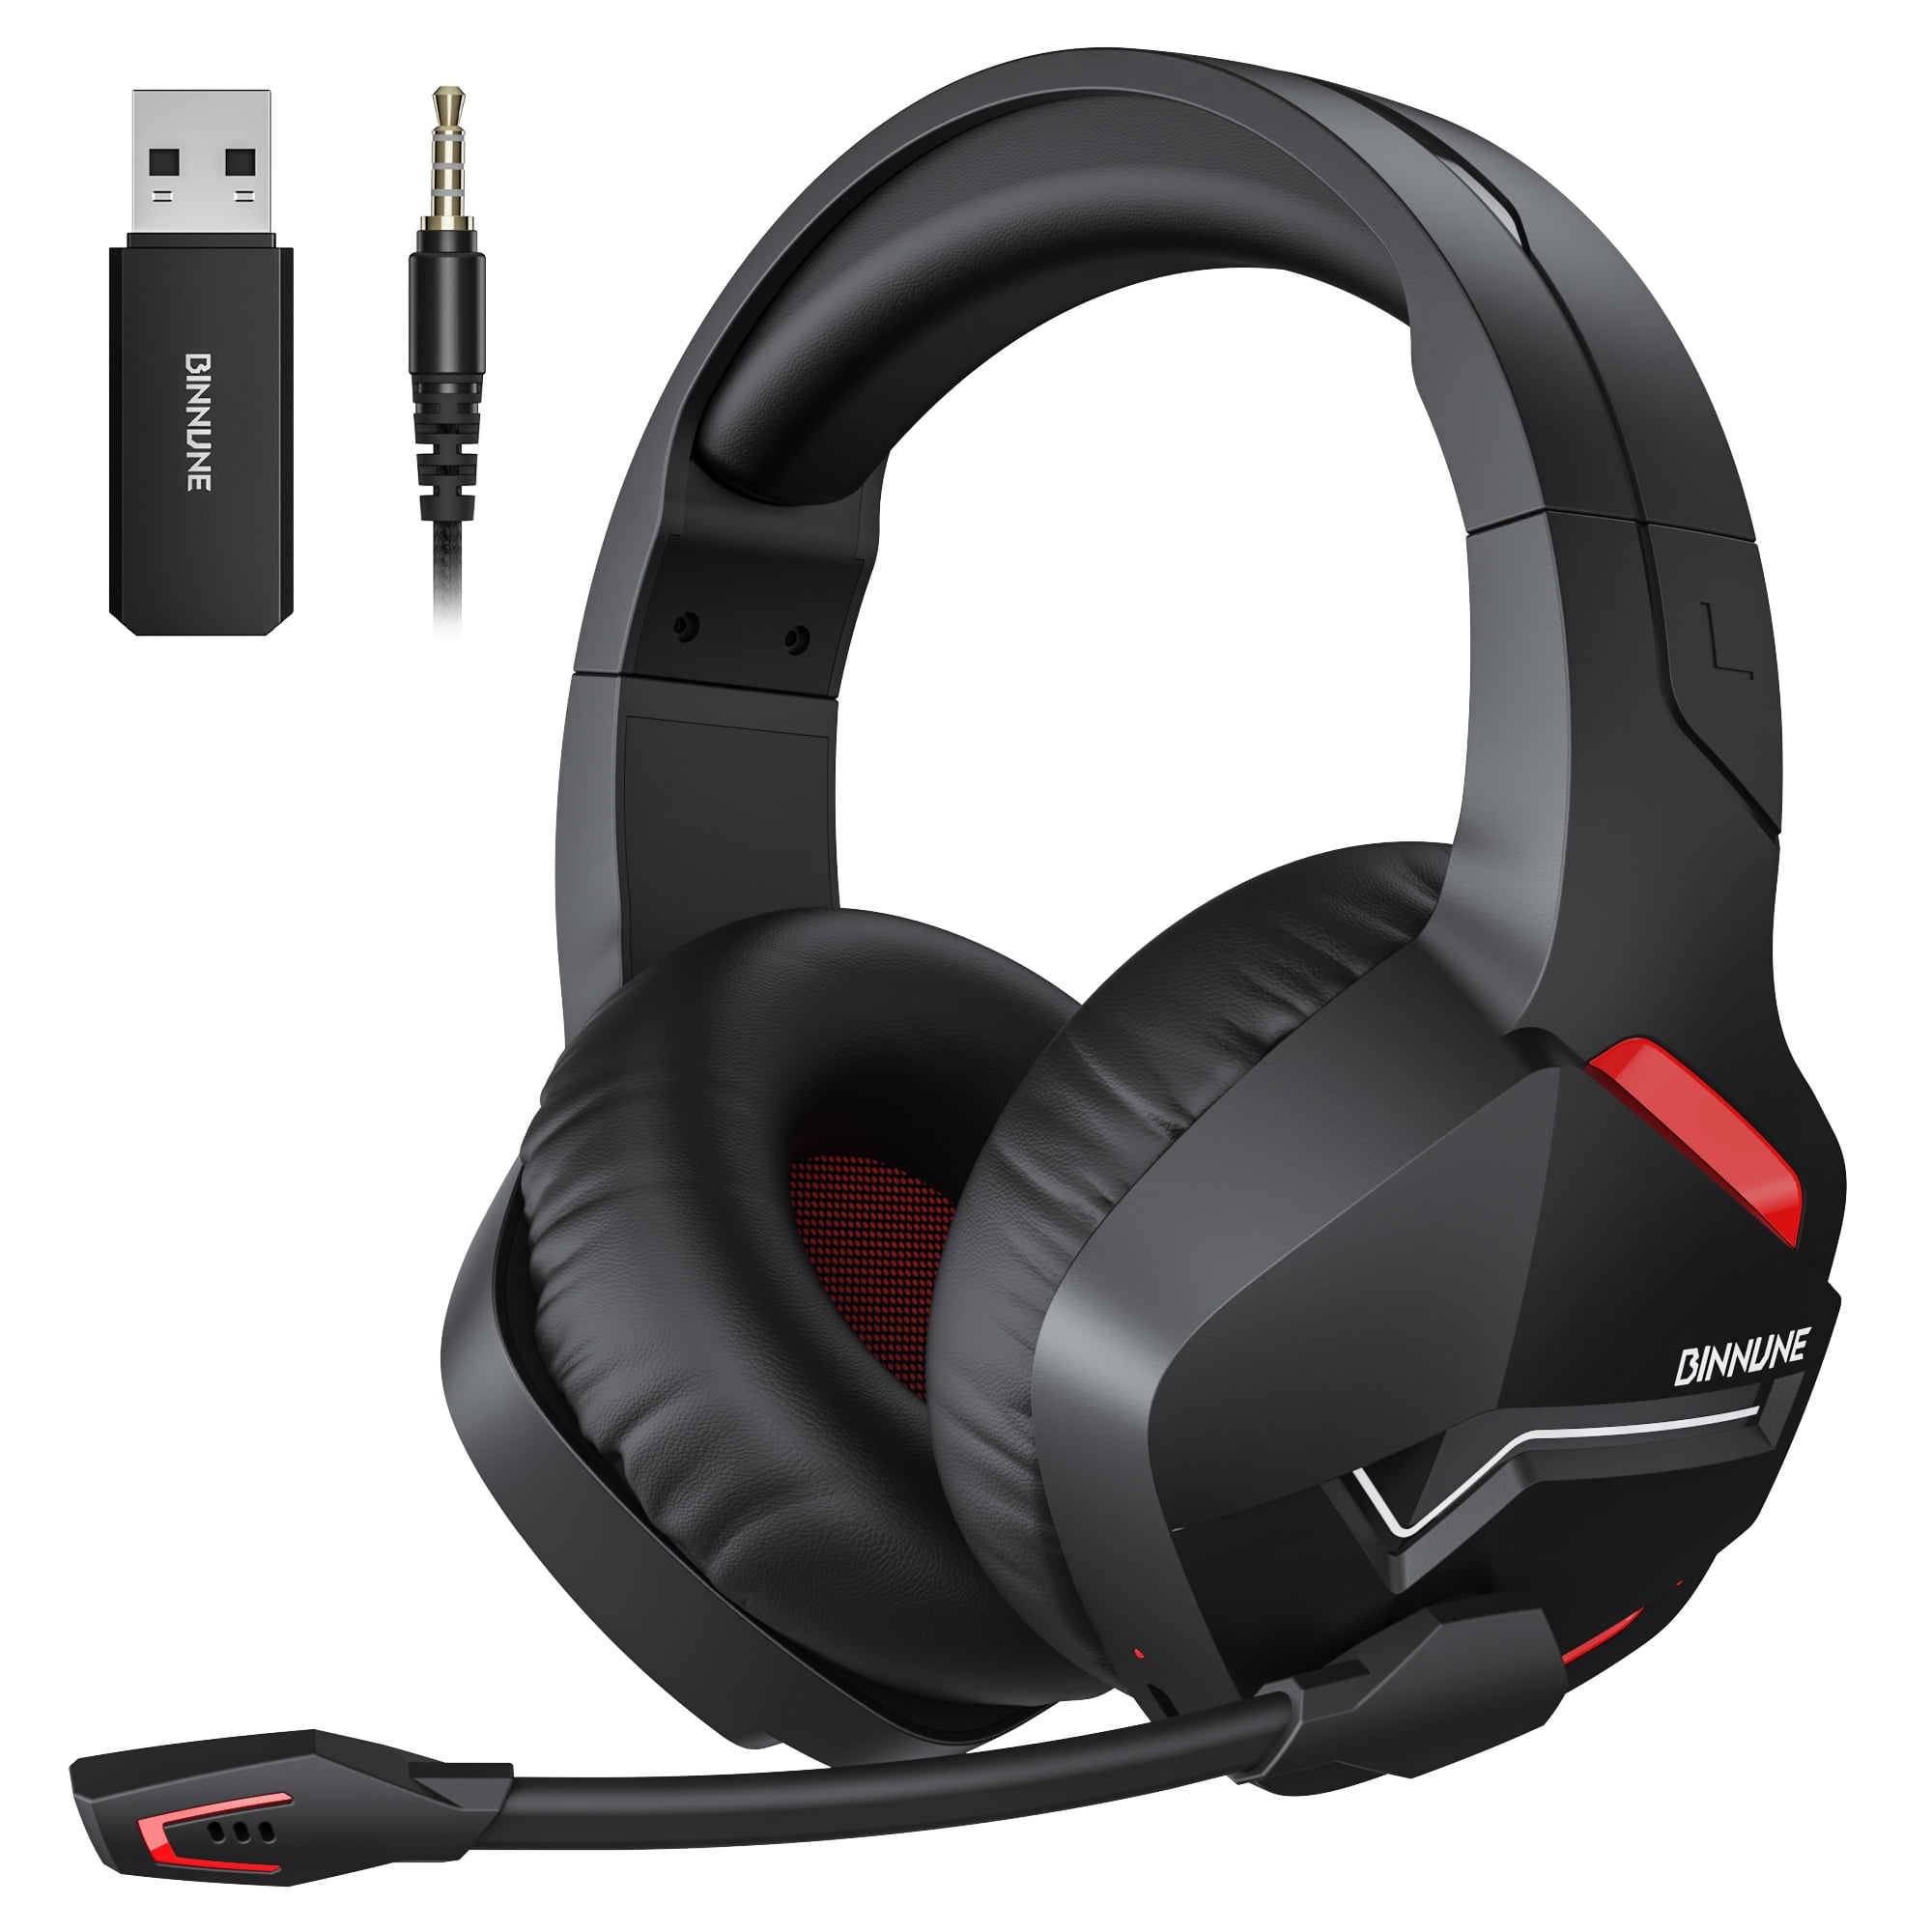 BINNUNE 2.4G Gaming Headset with Microphone for PC PS4 PS5 PlayStation, over Ear Bluetooth Game Headphone - Walmart.com